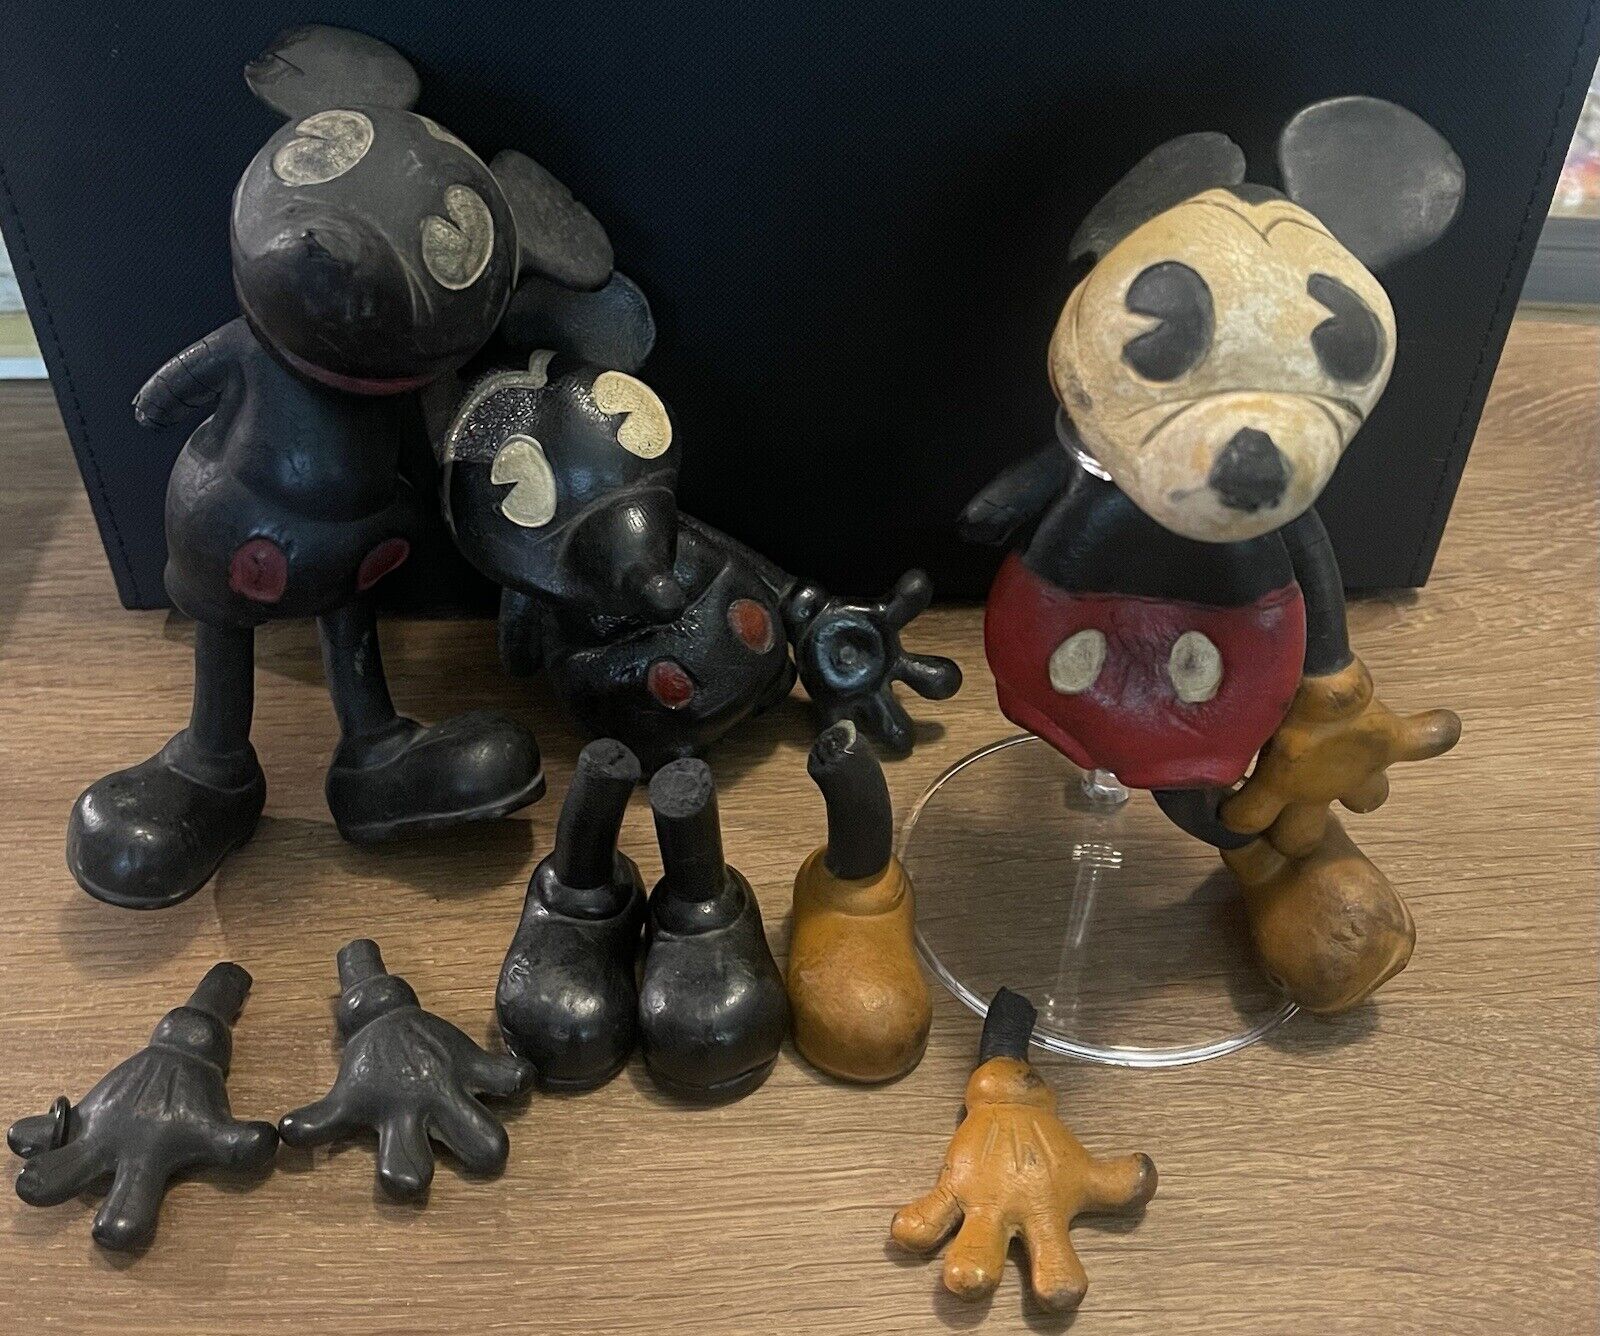 1930's Sieberling Rubber Mickey Mouse Pie-eyed Figures Disney Toy -need repairs